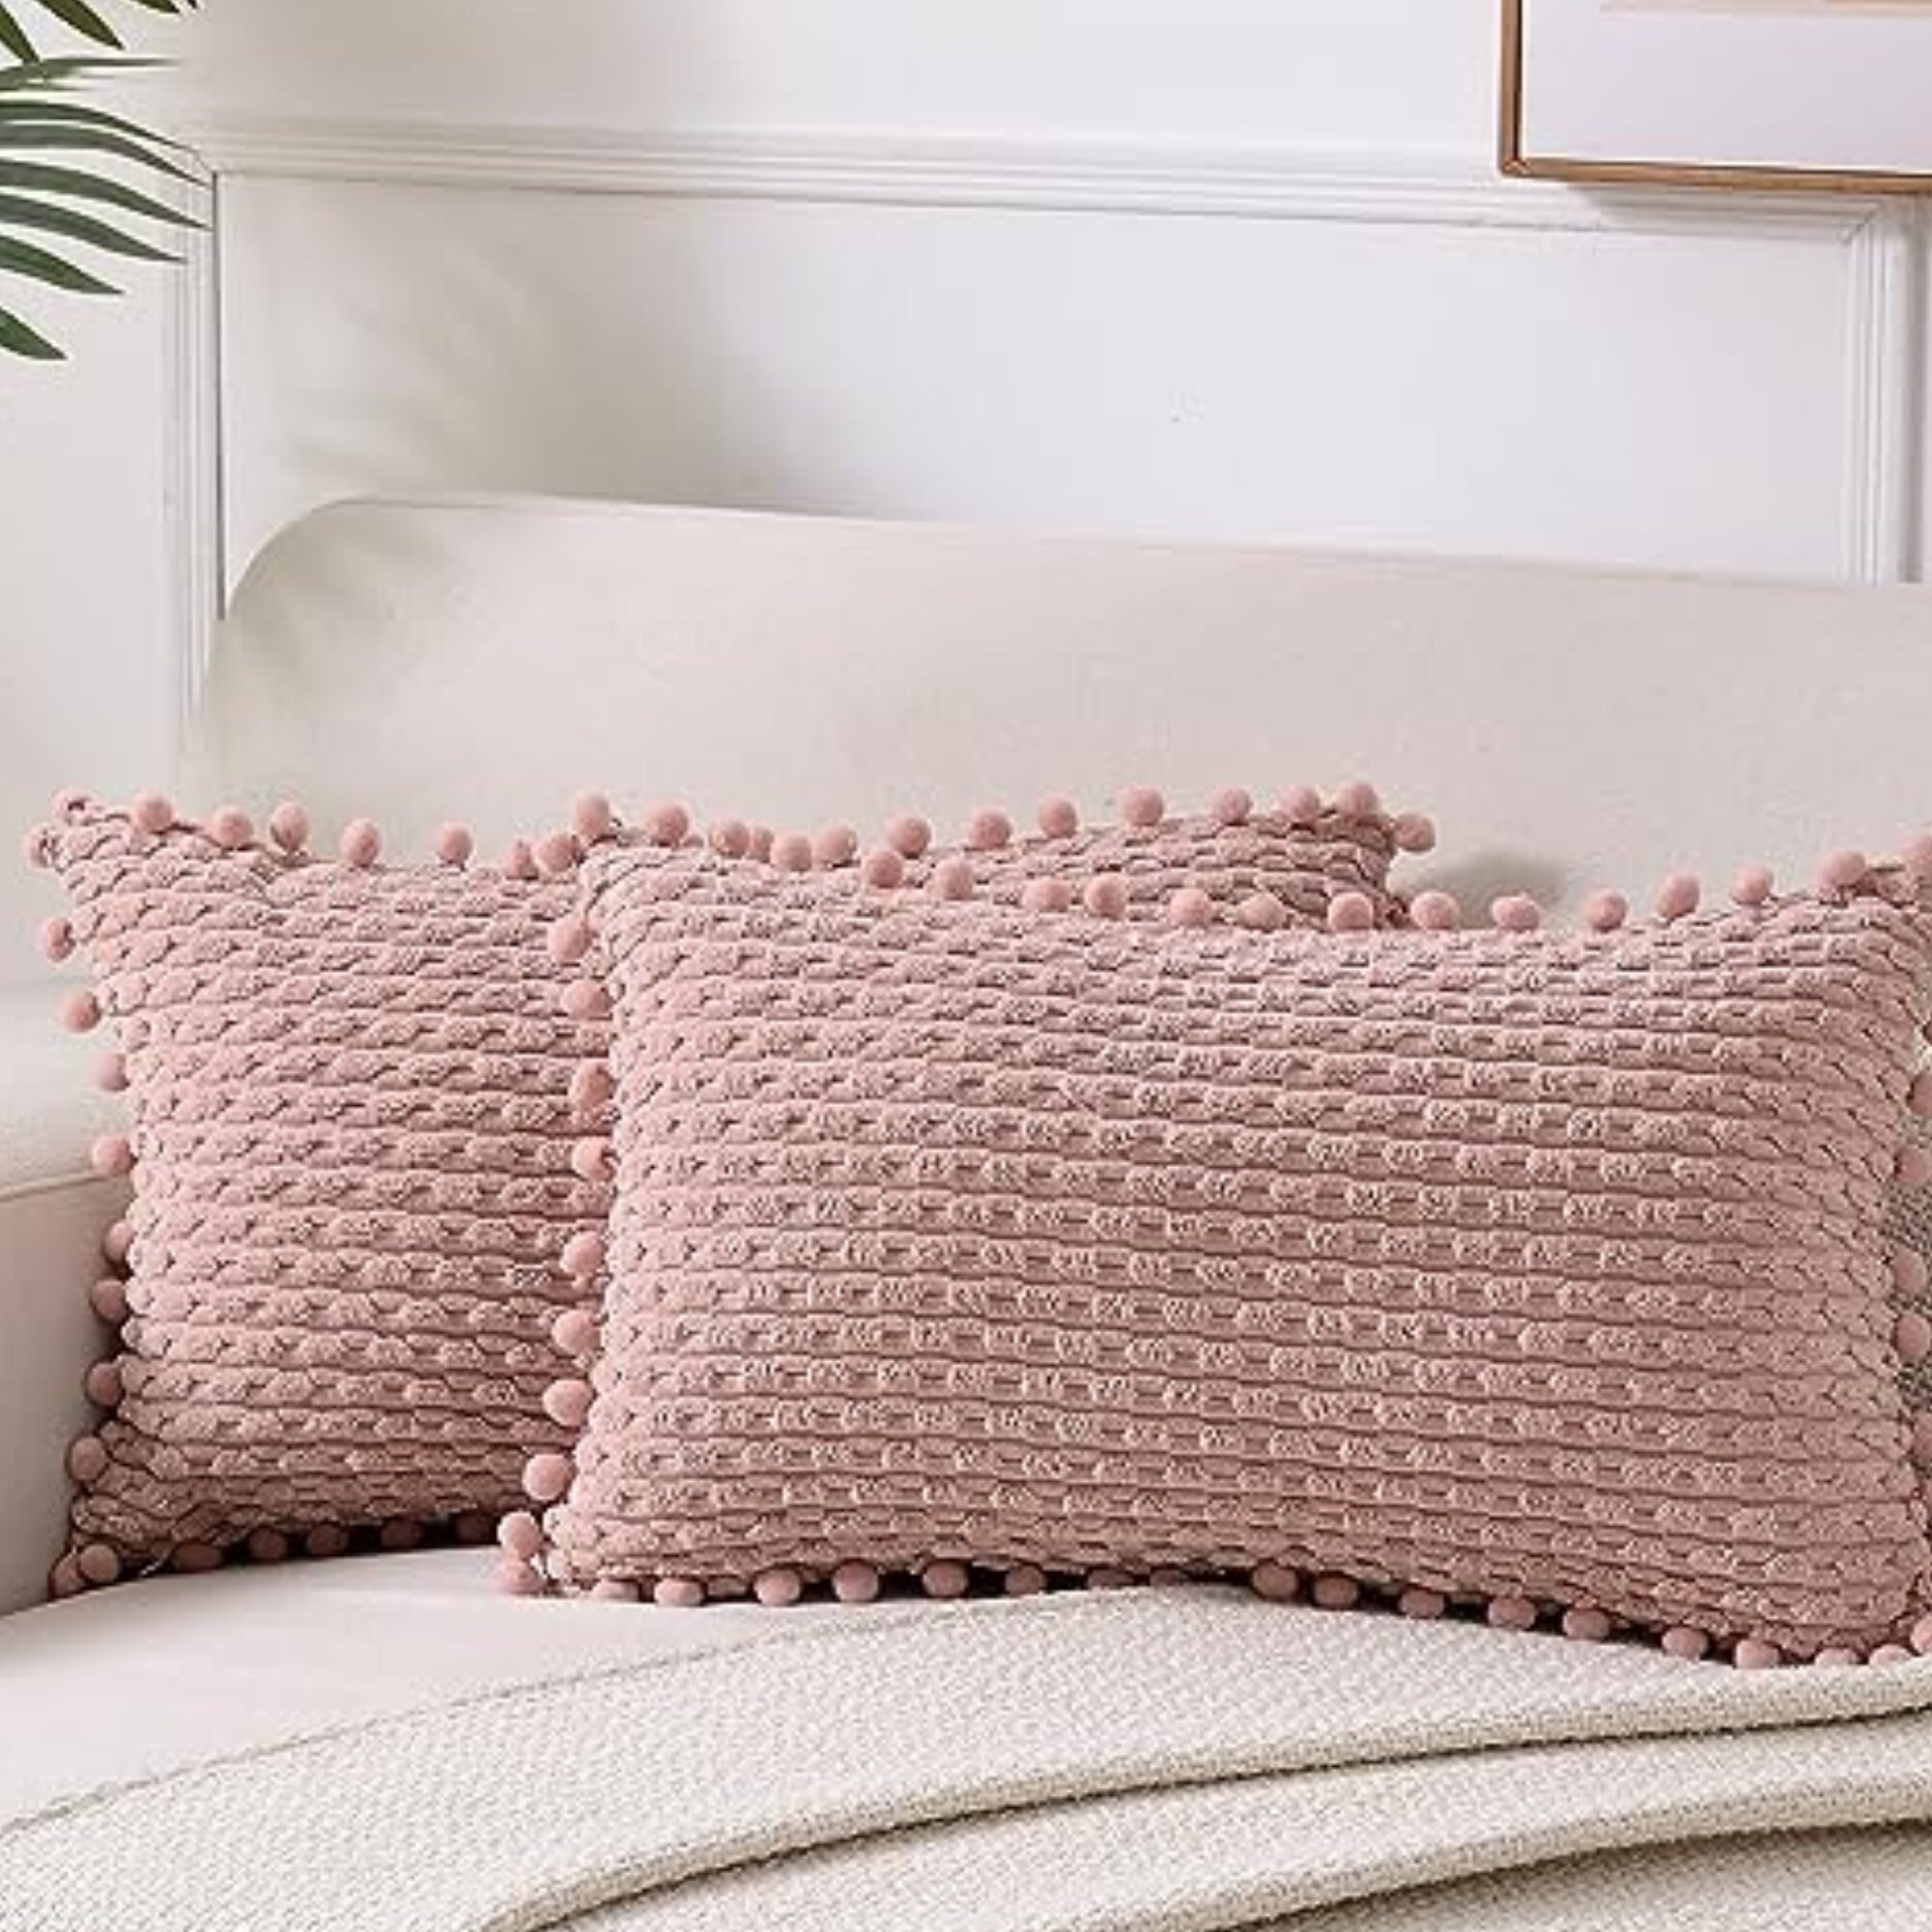 Pavilia Set Of 2 Pom Pom Throw Pillow Covers, Decorative Pompom Fringe  Square Cushion Cases For Couch Sofa Bed, Light Pink/18 X 18 : Target